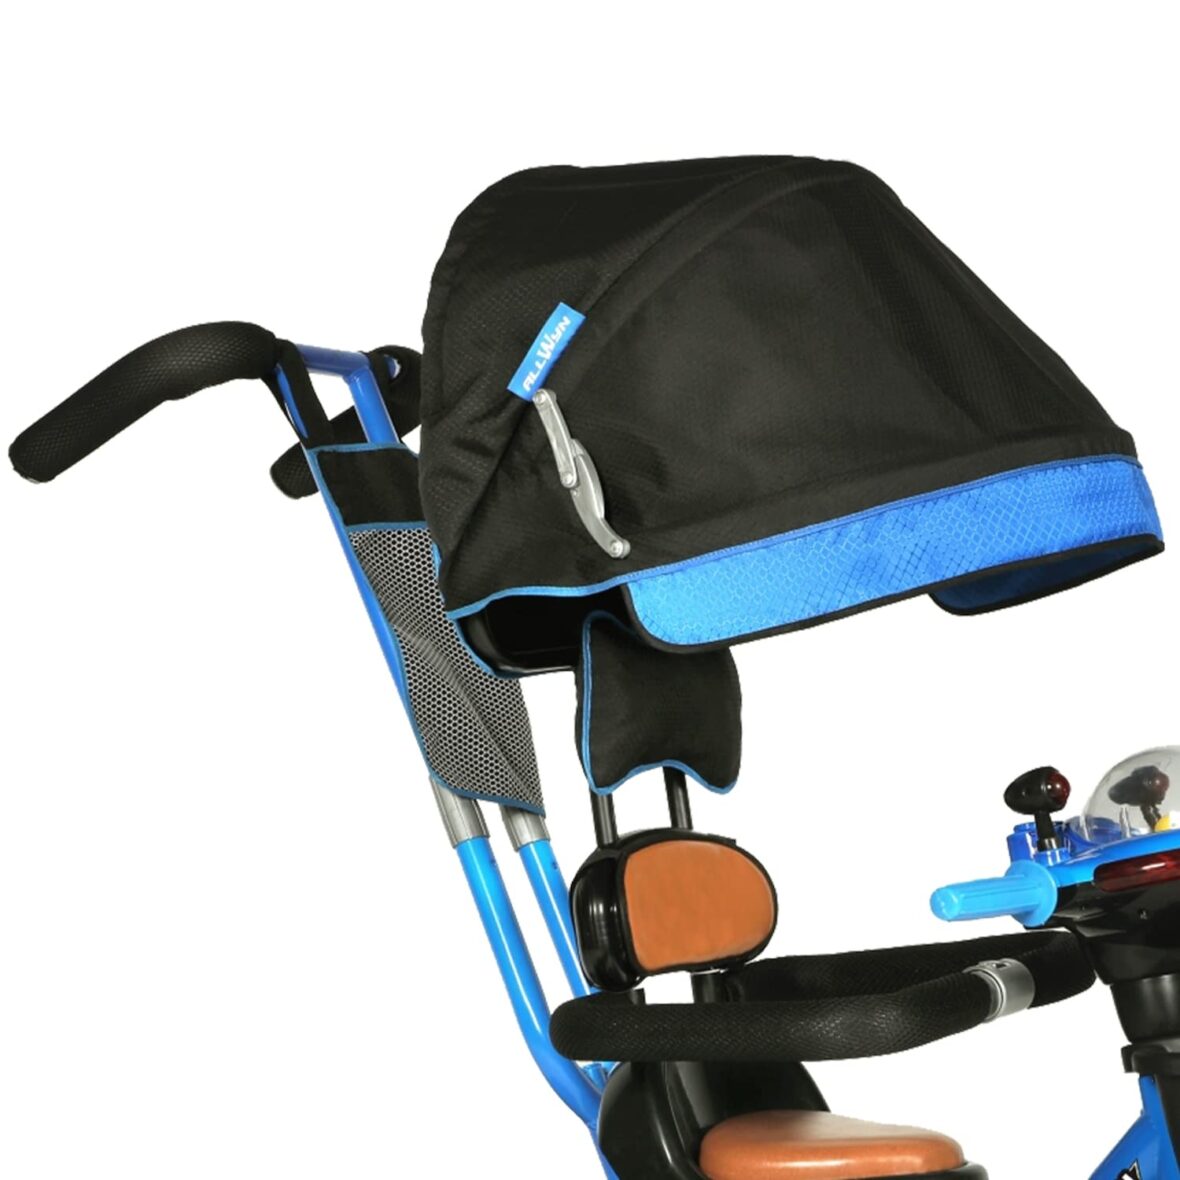 Webby Allwyn Cute Baby Smart Frame 360 Degree Seat Rotation Toddler Tricycle with LED Hood, Musical Horn, Front & Rear Basket, Foldable Canopy and Parental Handle for 1-3 Years Kids (Blue)